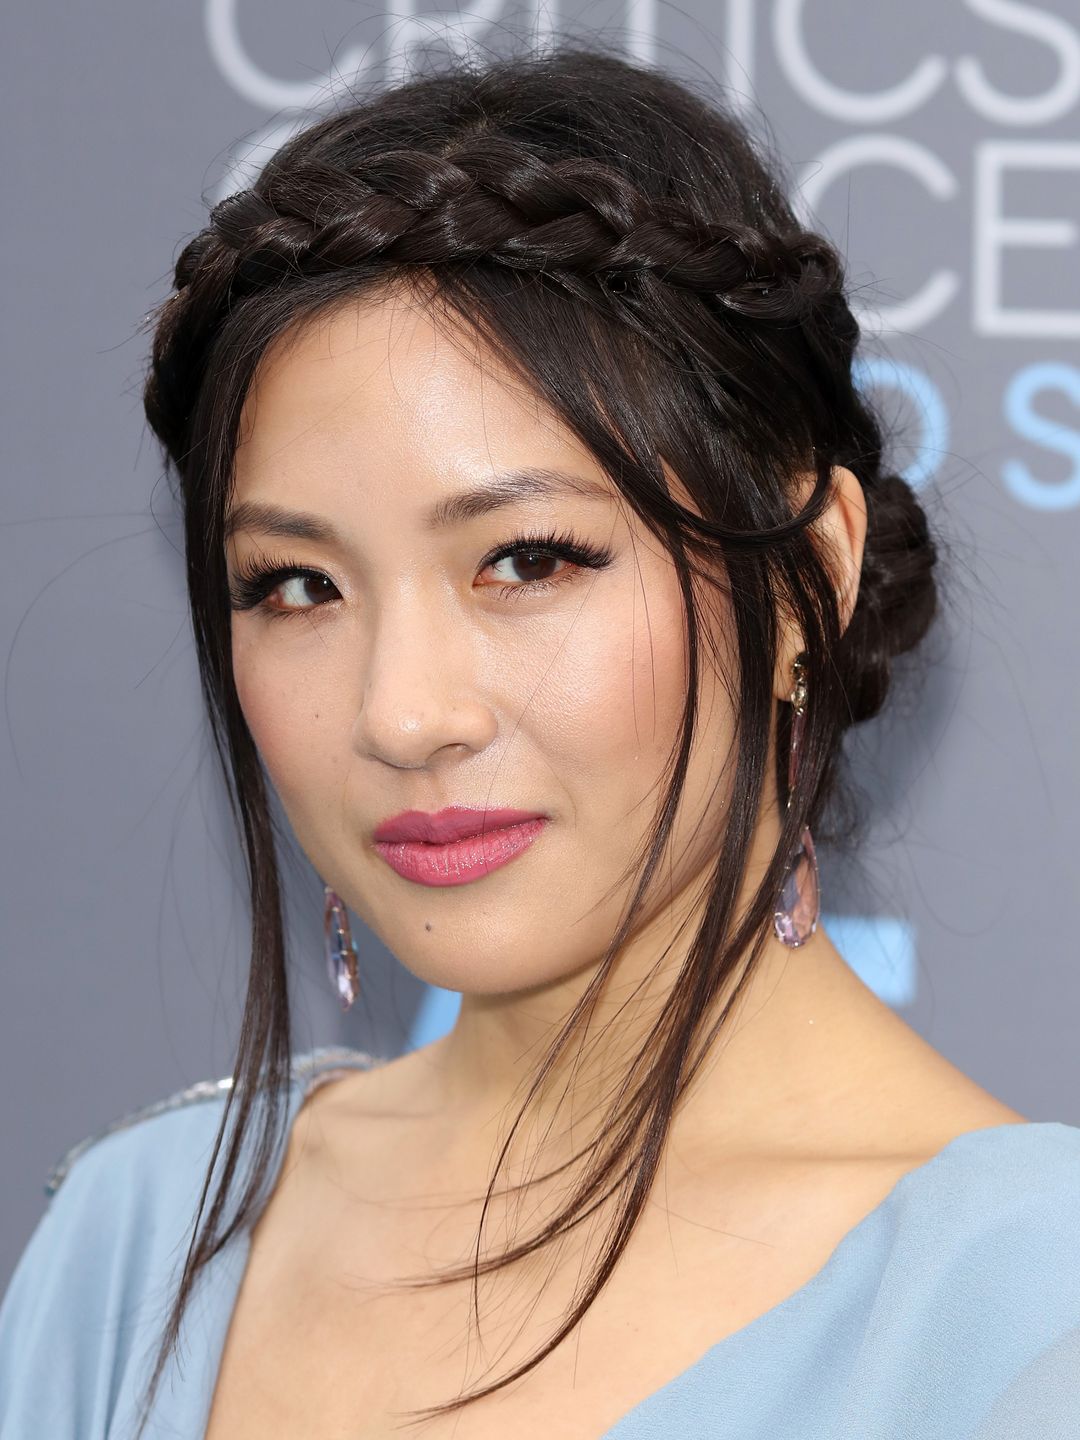 Constance Wu early life